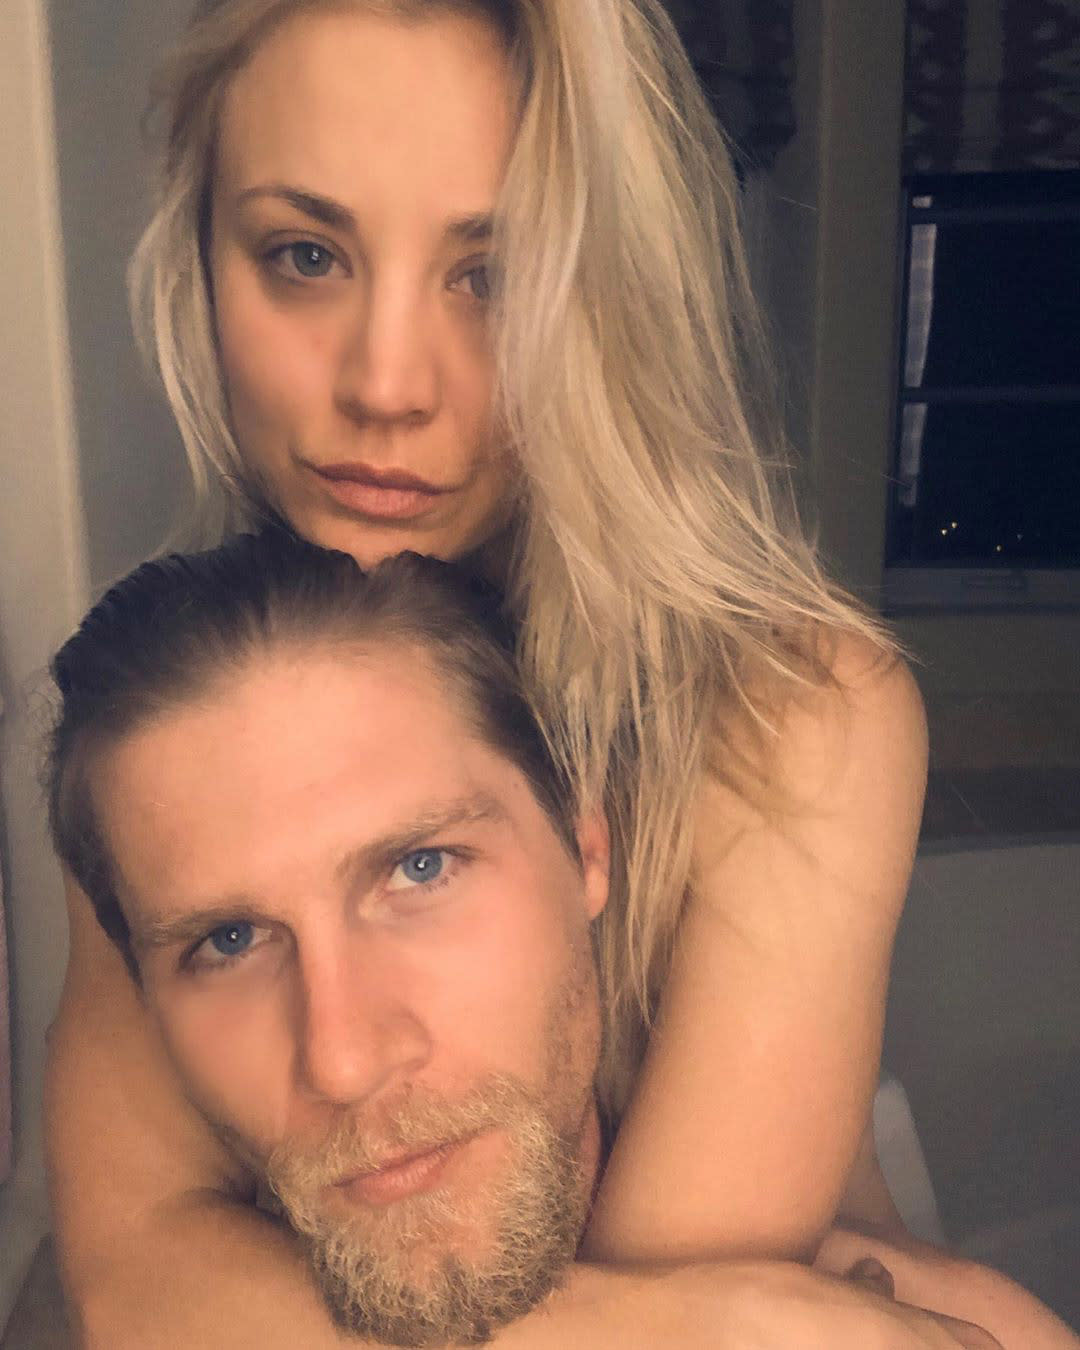 Kaley Cuoco's Husband Ruins Sexy Photo by Saying They Look Like Siblings:  'Moment Over'